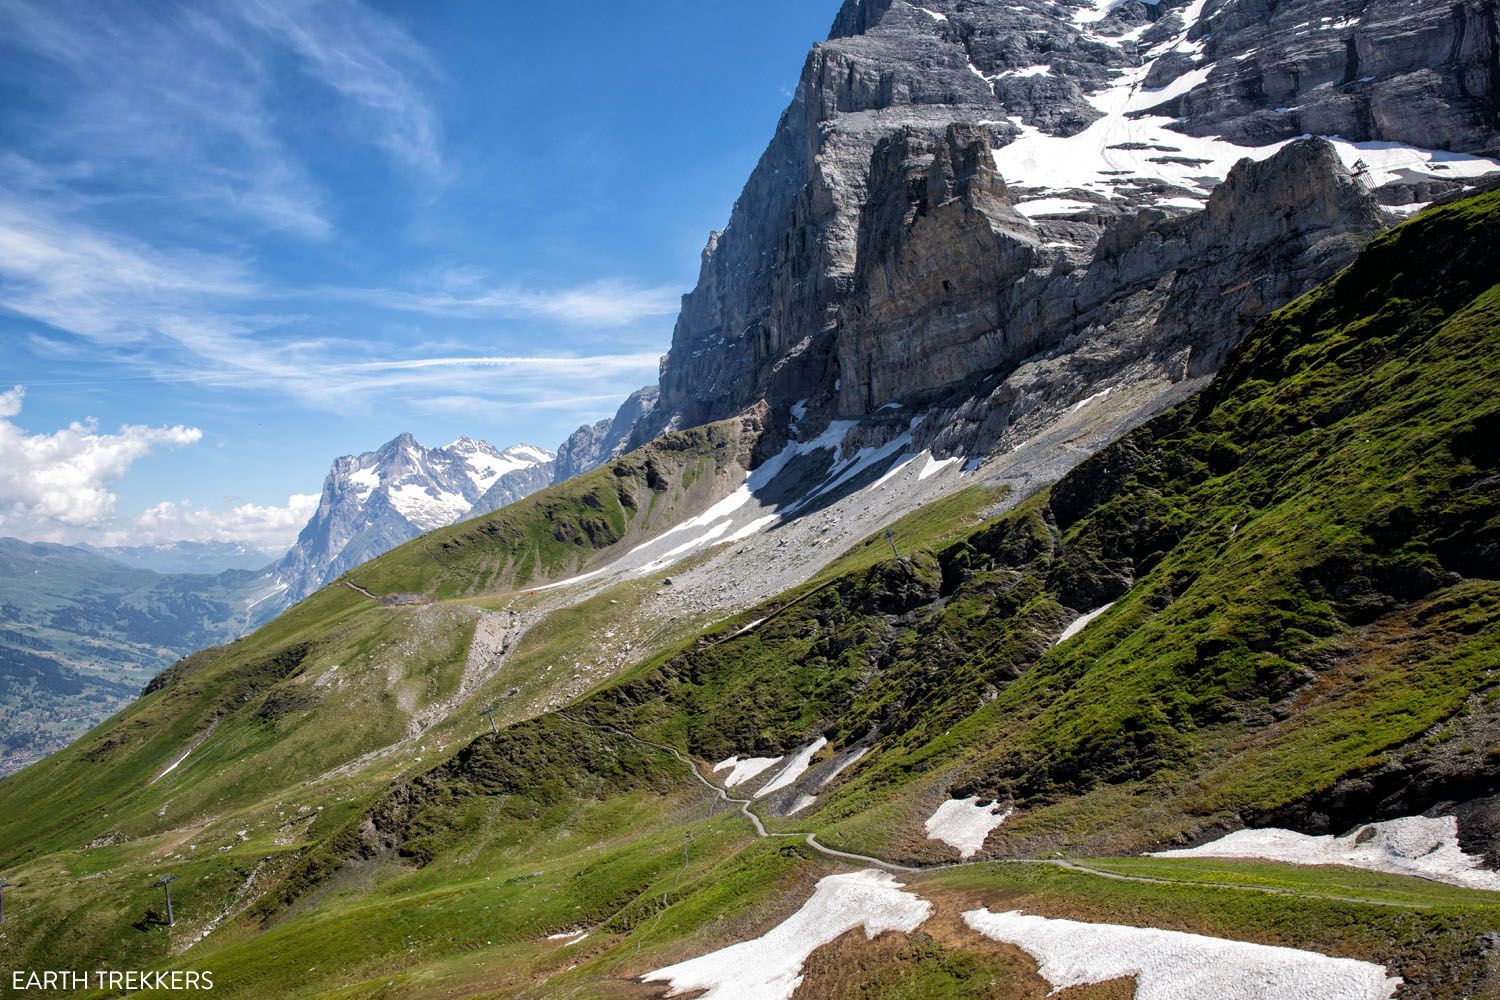 How to Hike the Eiger Trail